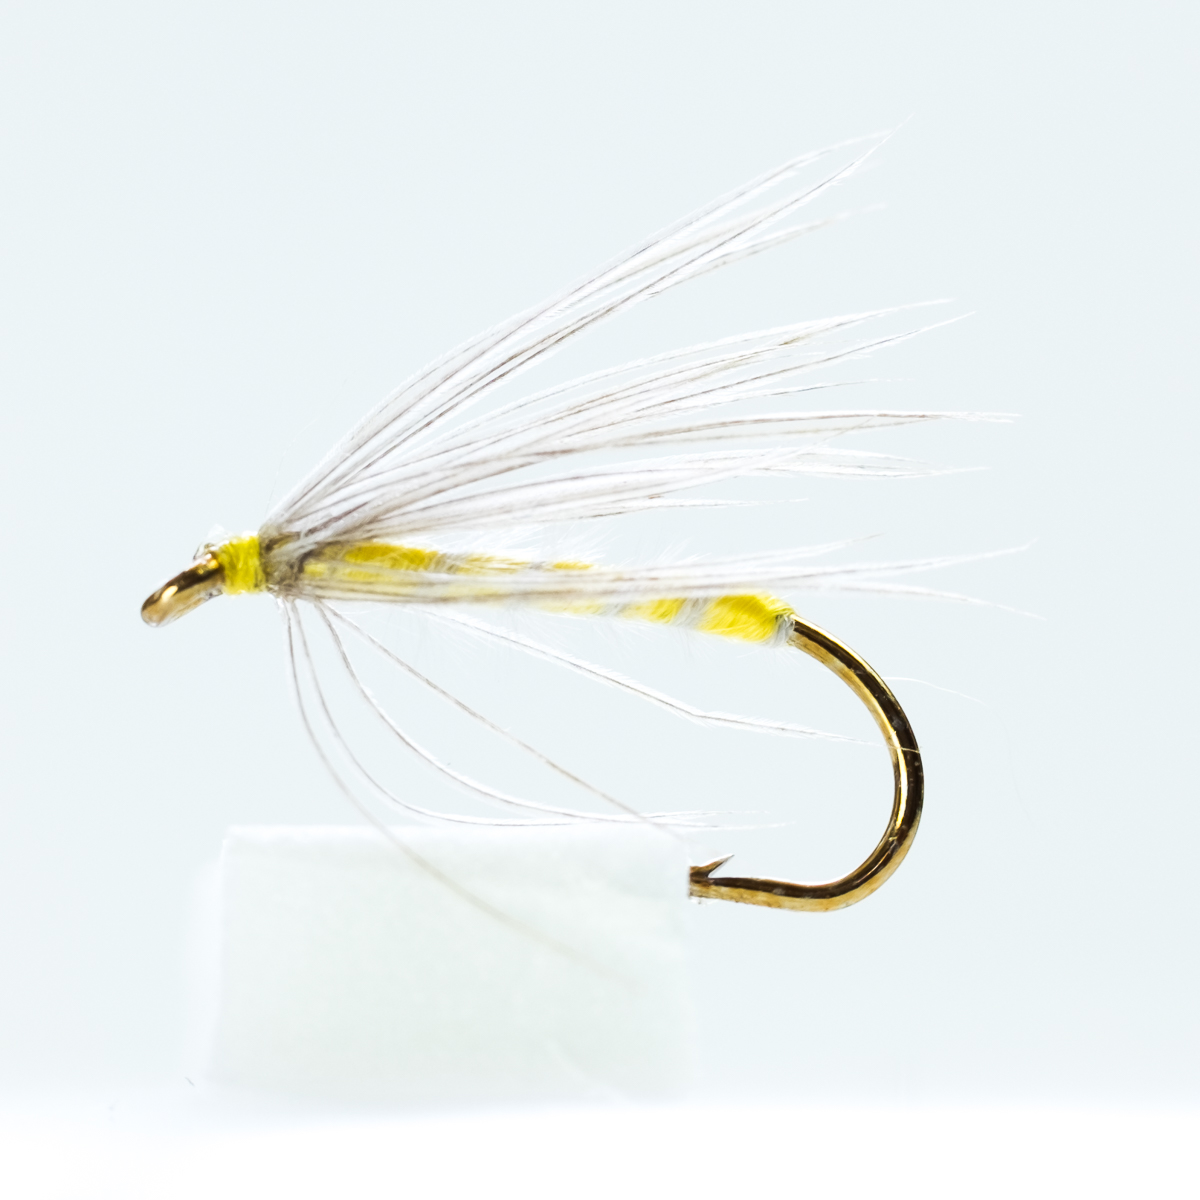 6 Waterhen BLOA Wet Trout Fly Fishing Flies Taille Options bydragonflies